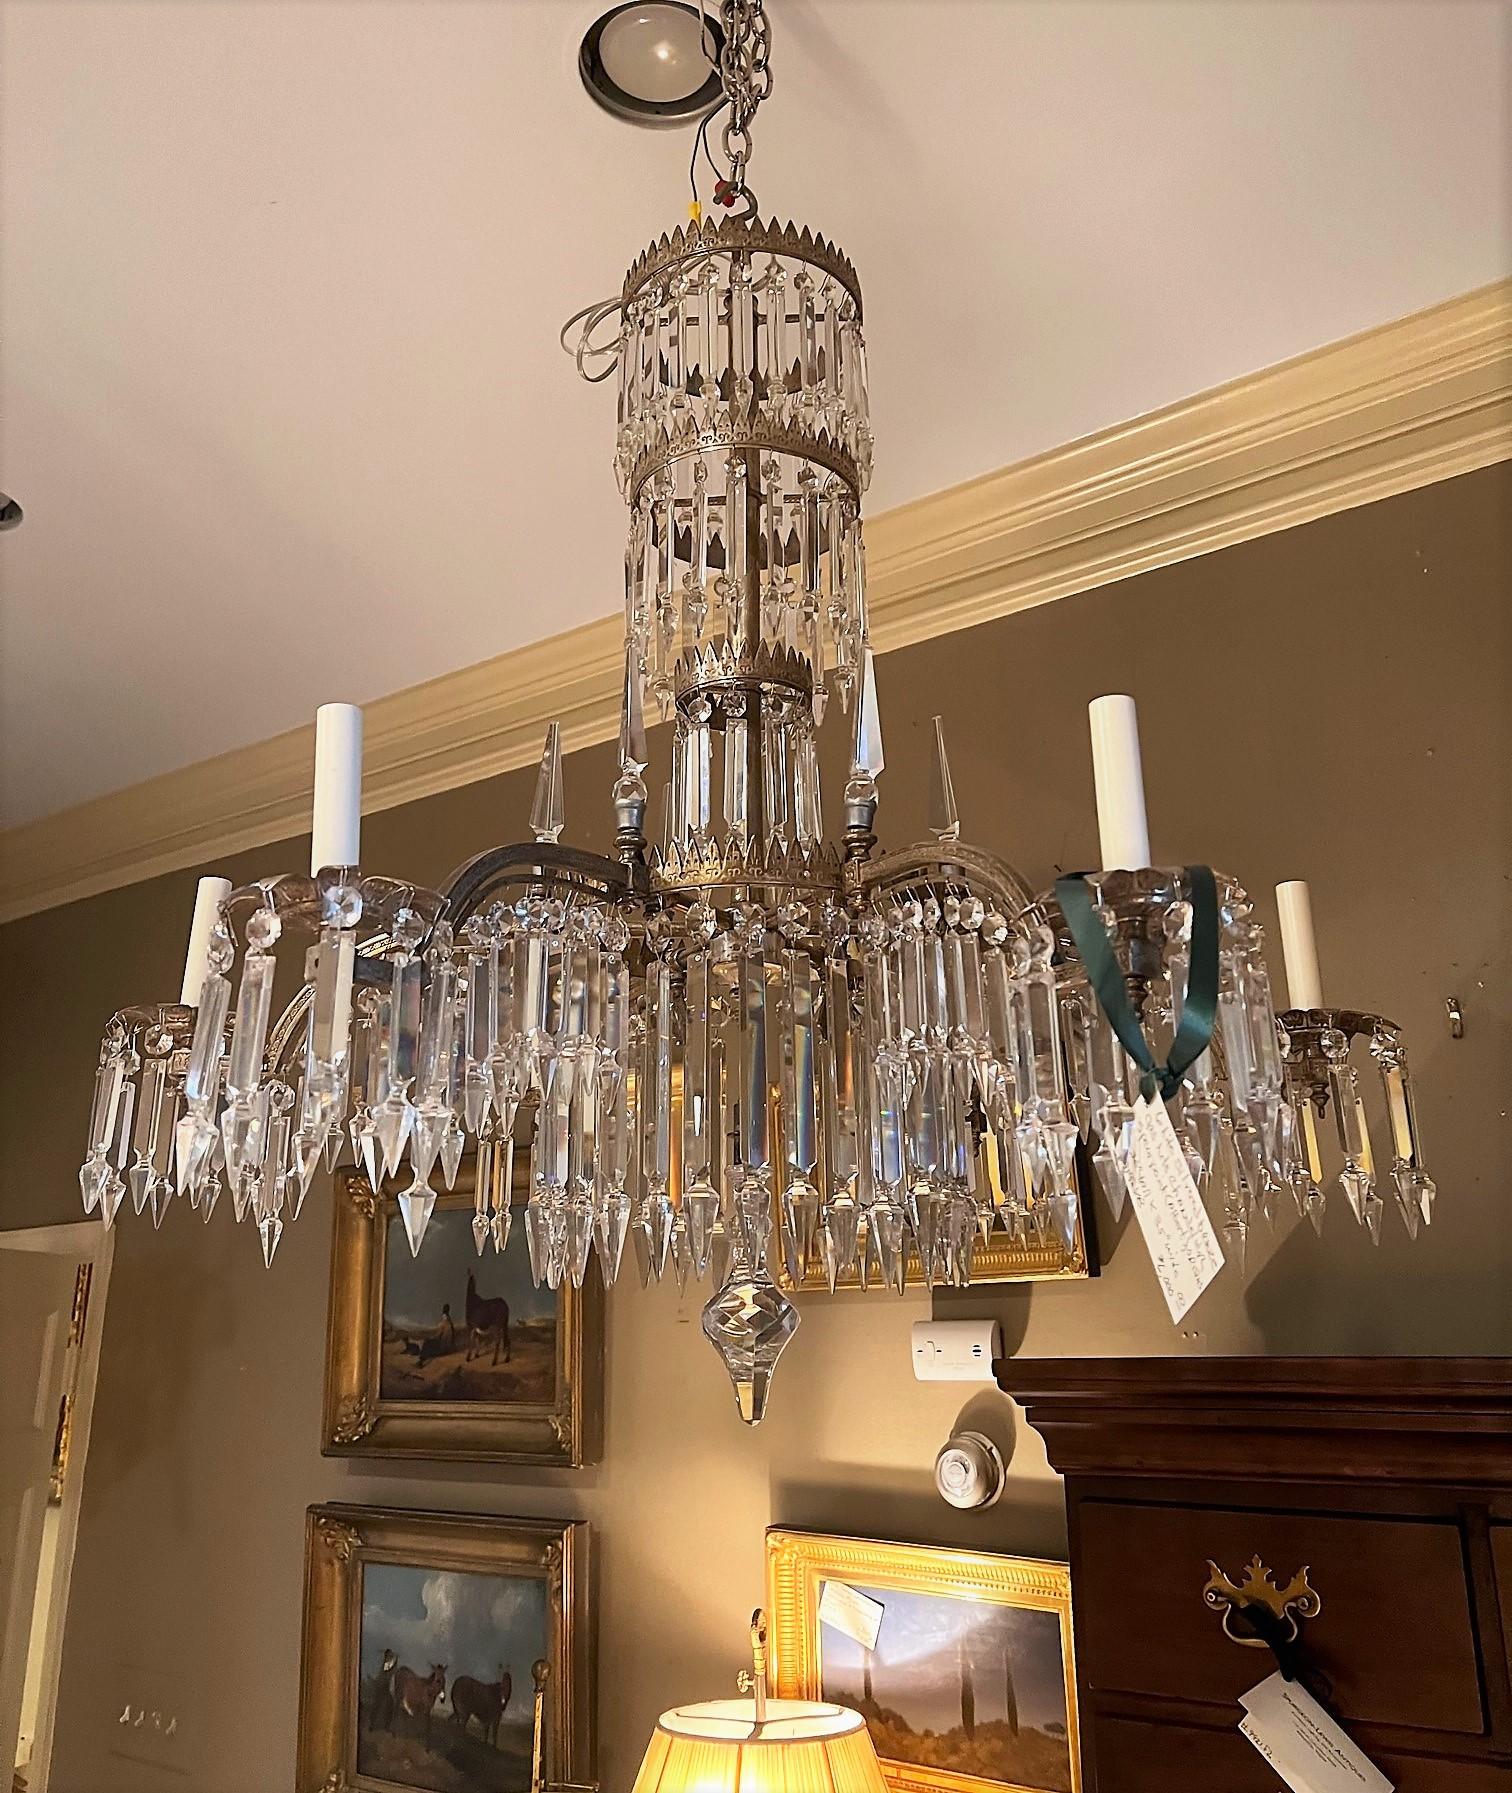 This exceptional and stunning chandelier was originally fitted for gas in a very fashionable home of the mid-Victorian era. The extraordinary design was inspired by the decorative motifs of ancient Babylon. In the early 20th Century the fixture was